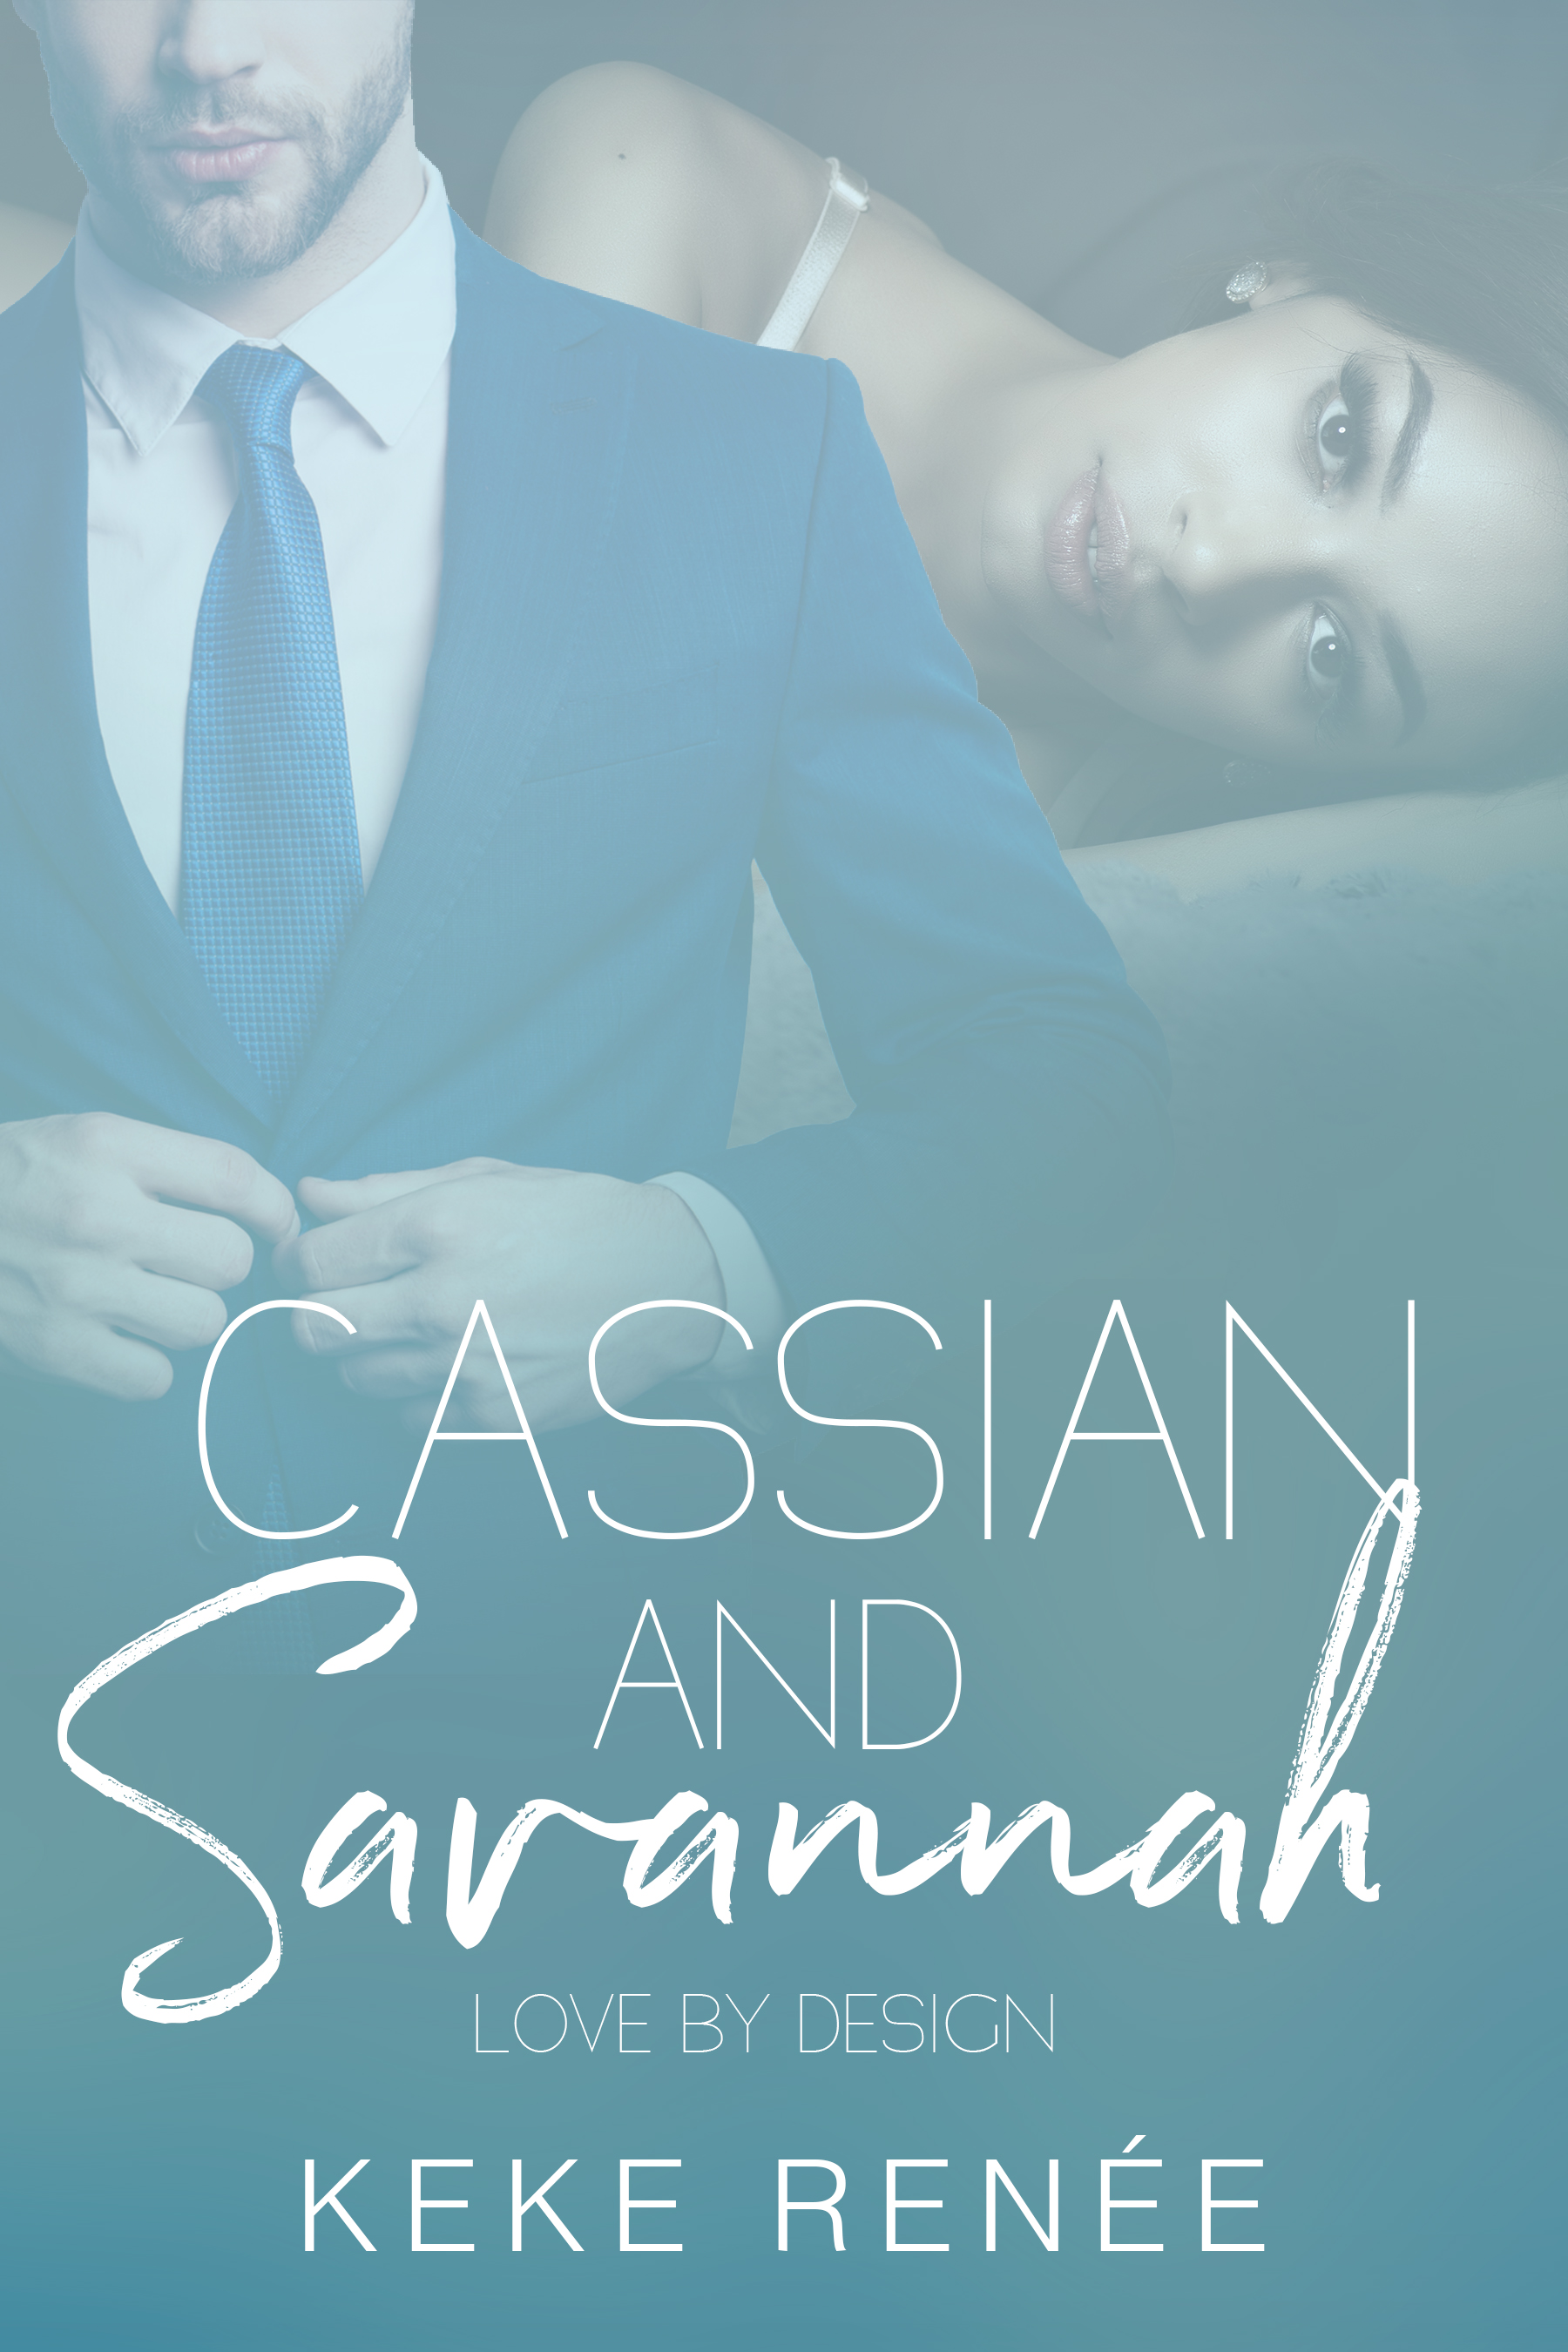 Cassian and Savannah Love By Design